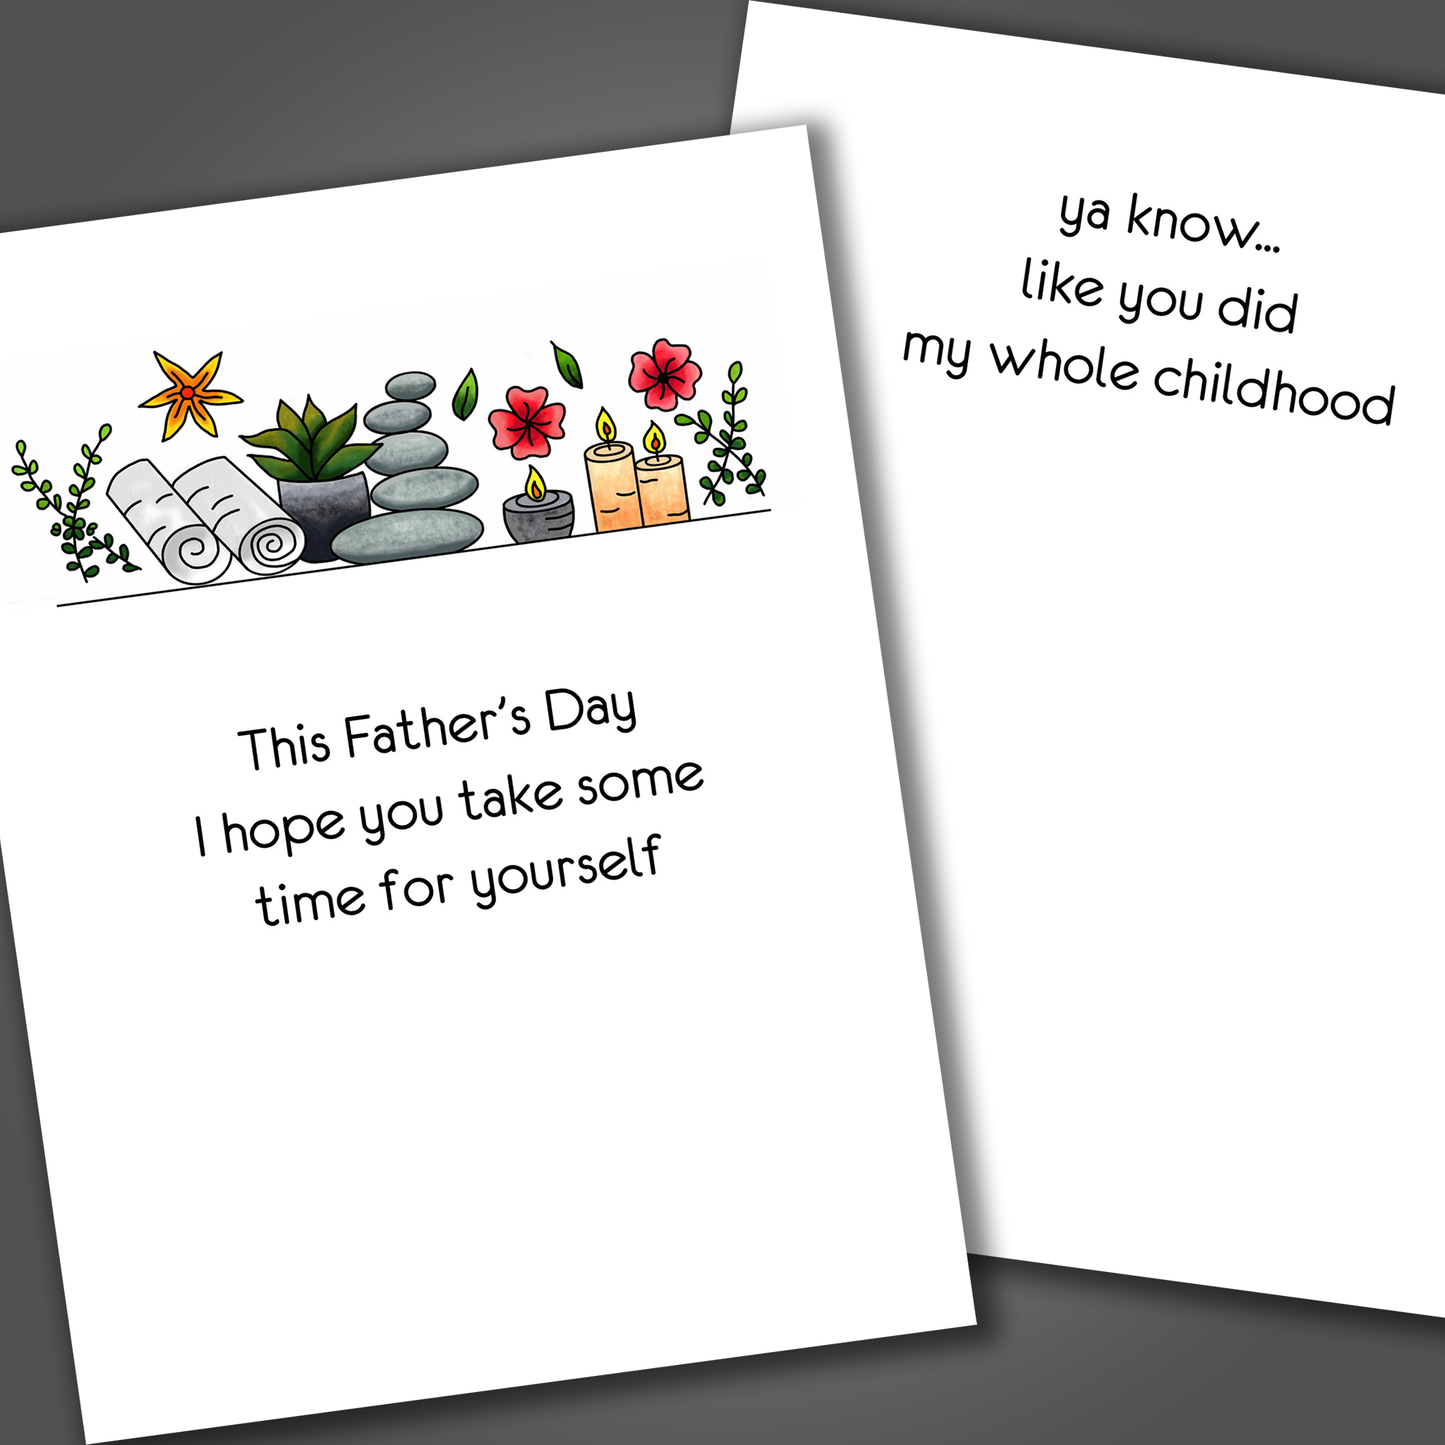 Funny father's day card with relaxing plants and a massage mat on the front of the card. Inside the card is a funny joke that calls the dad lazy.